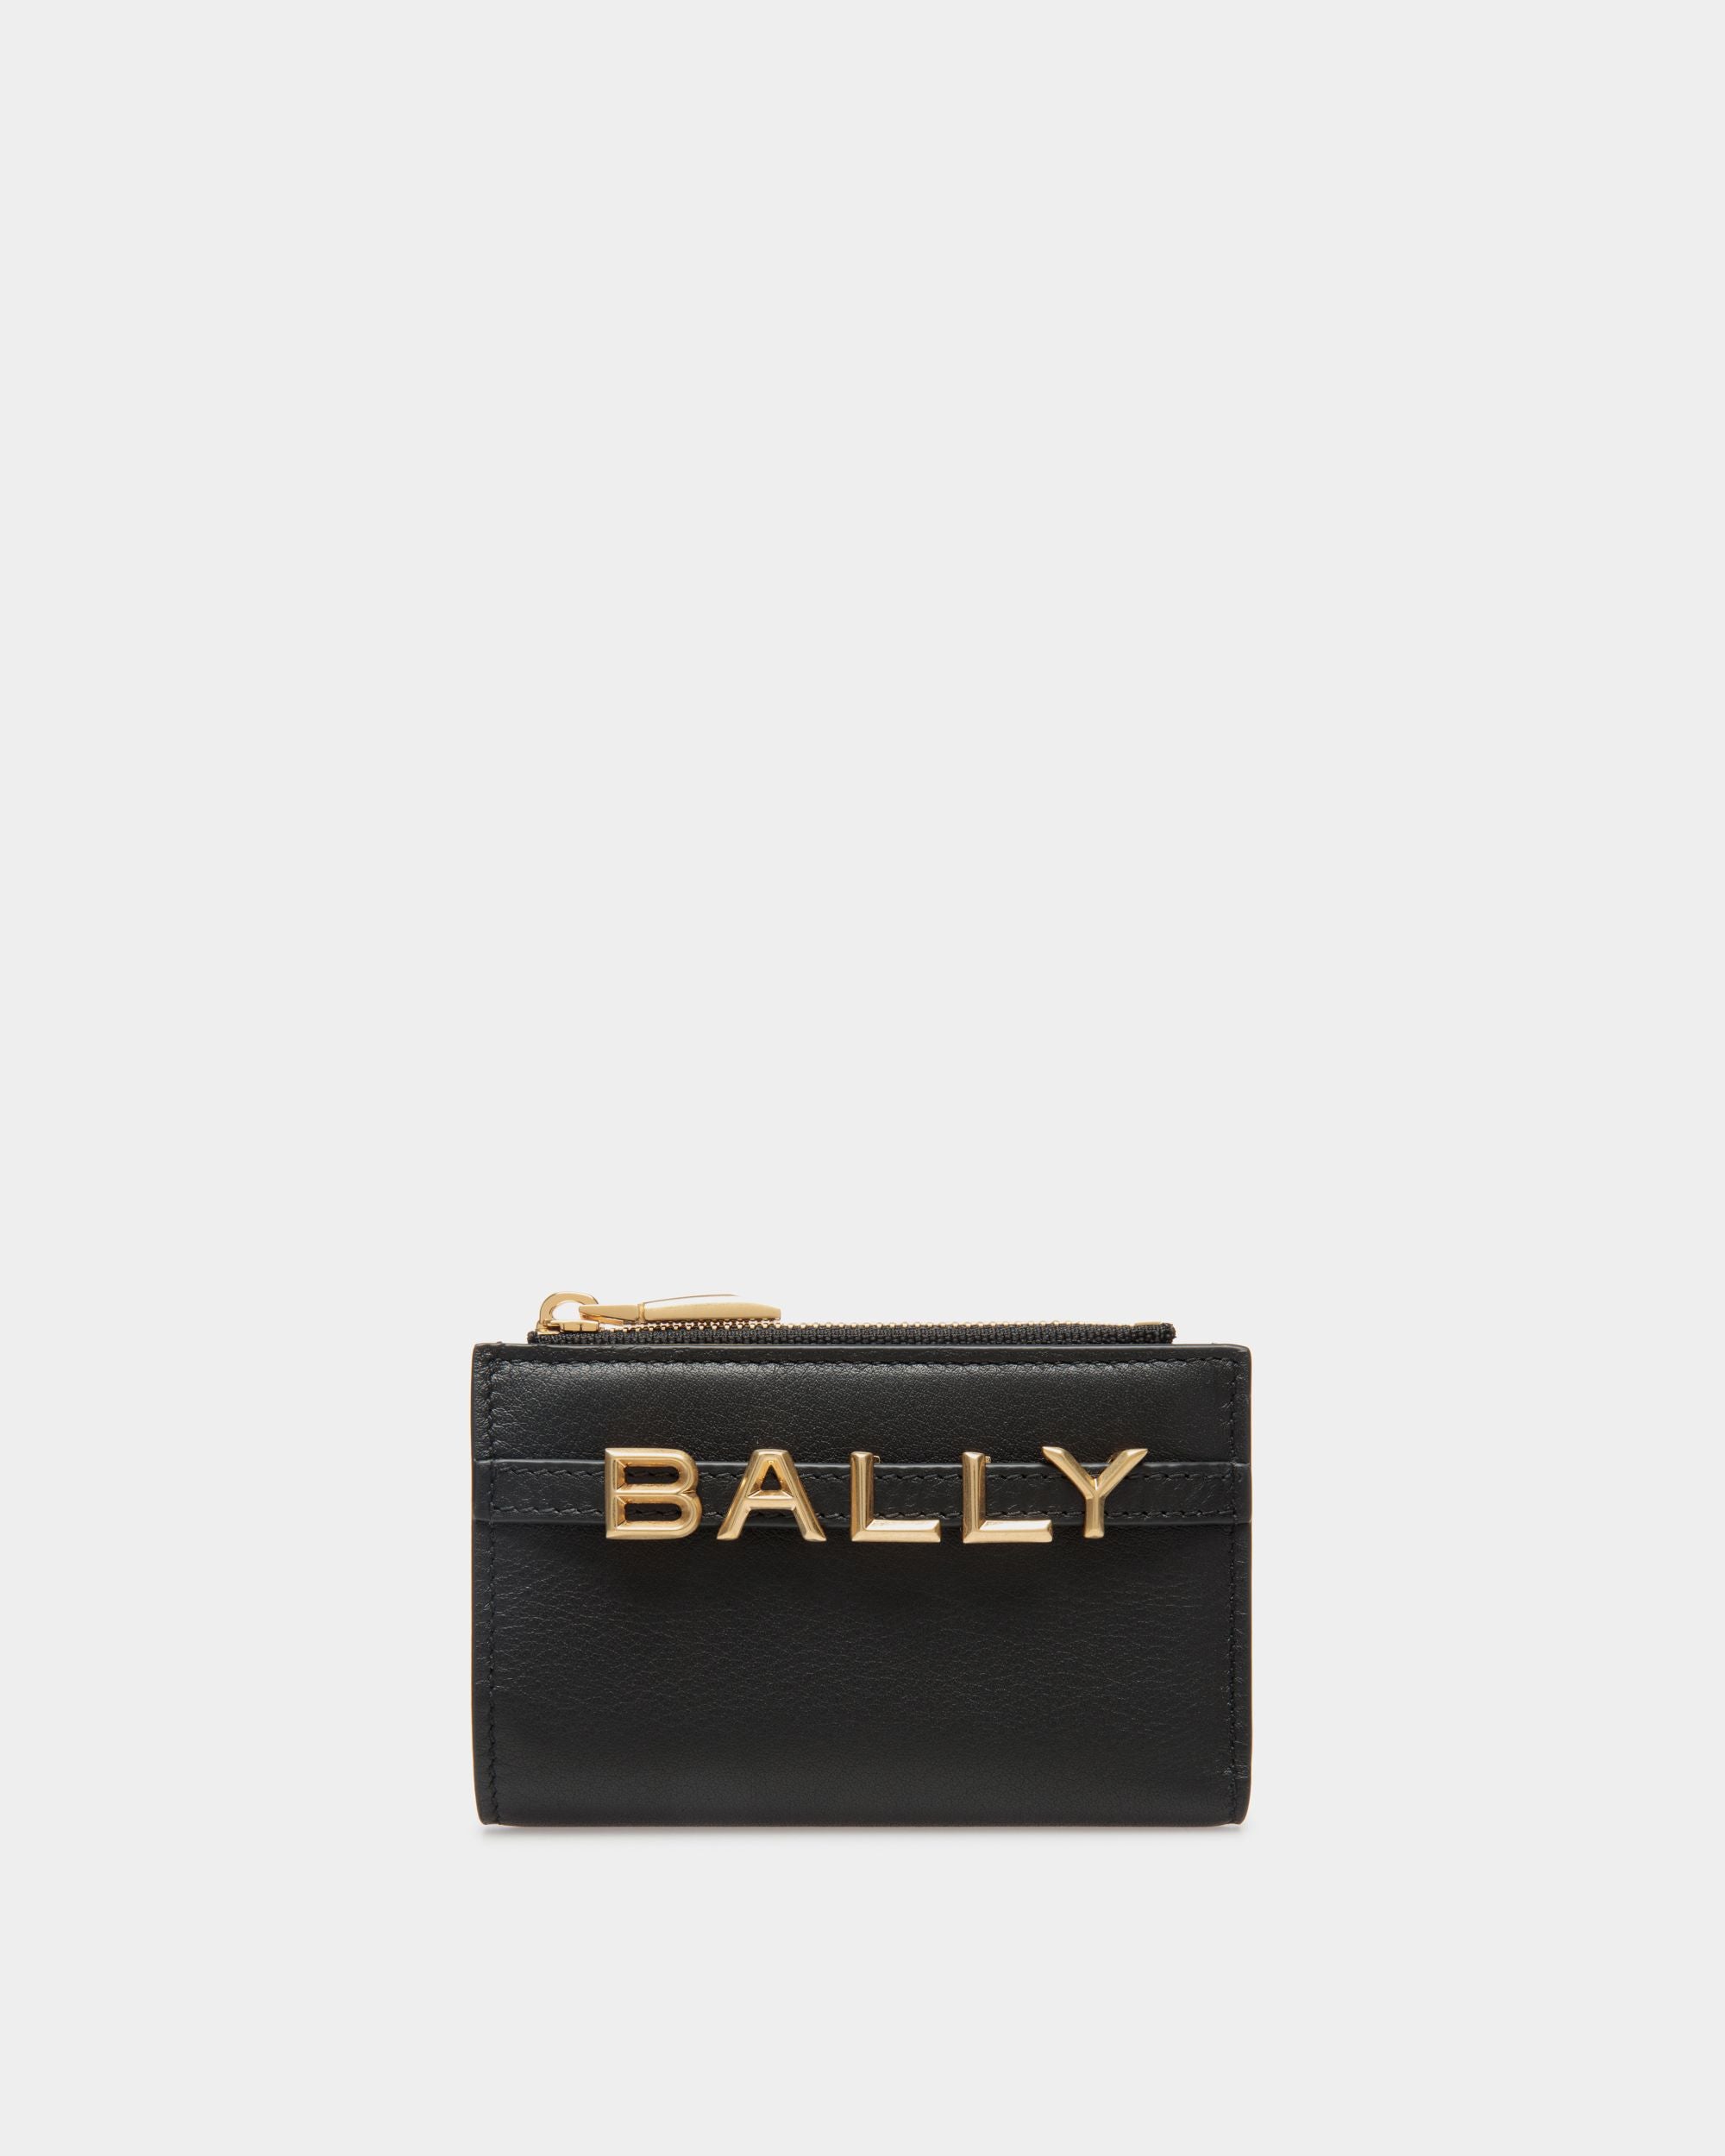 Bally Spell | Women's Wallet in Black Leather | Bally | Still Life Front